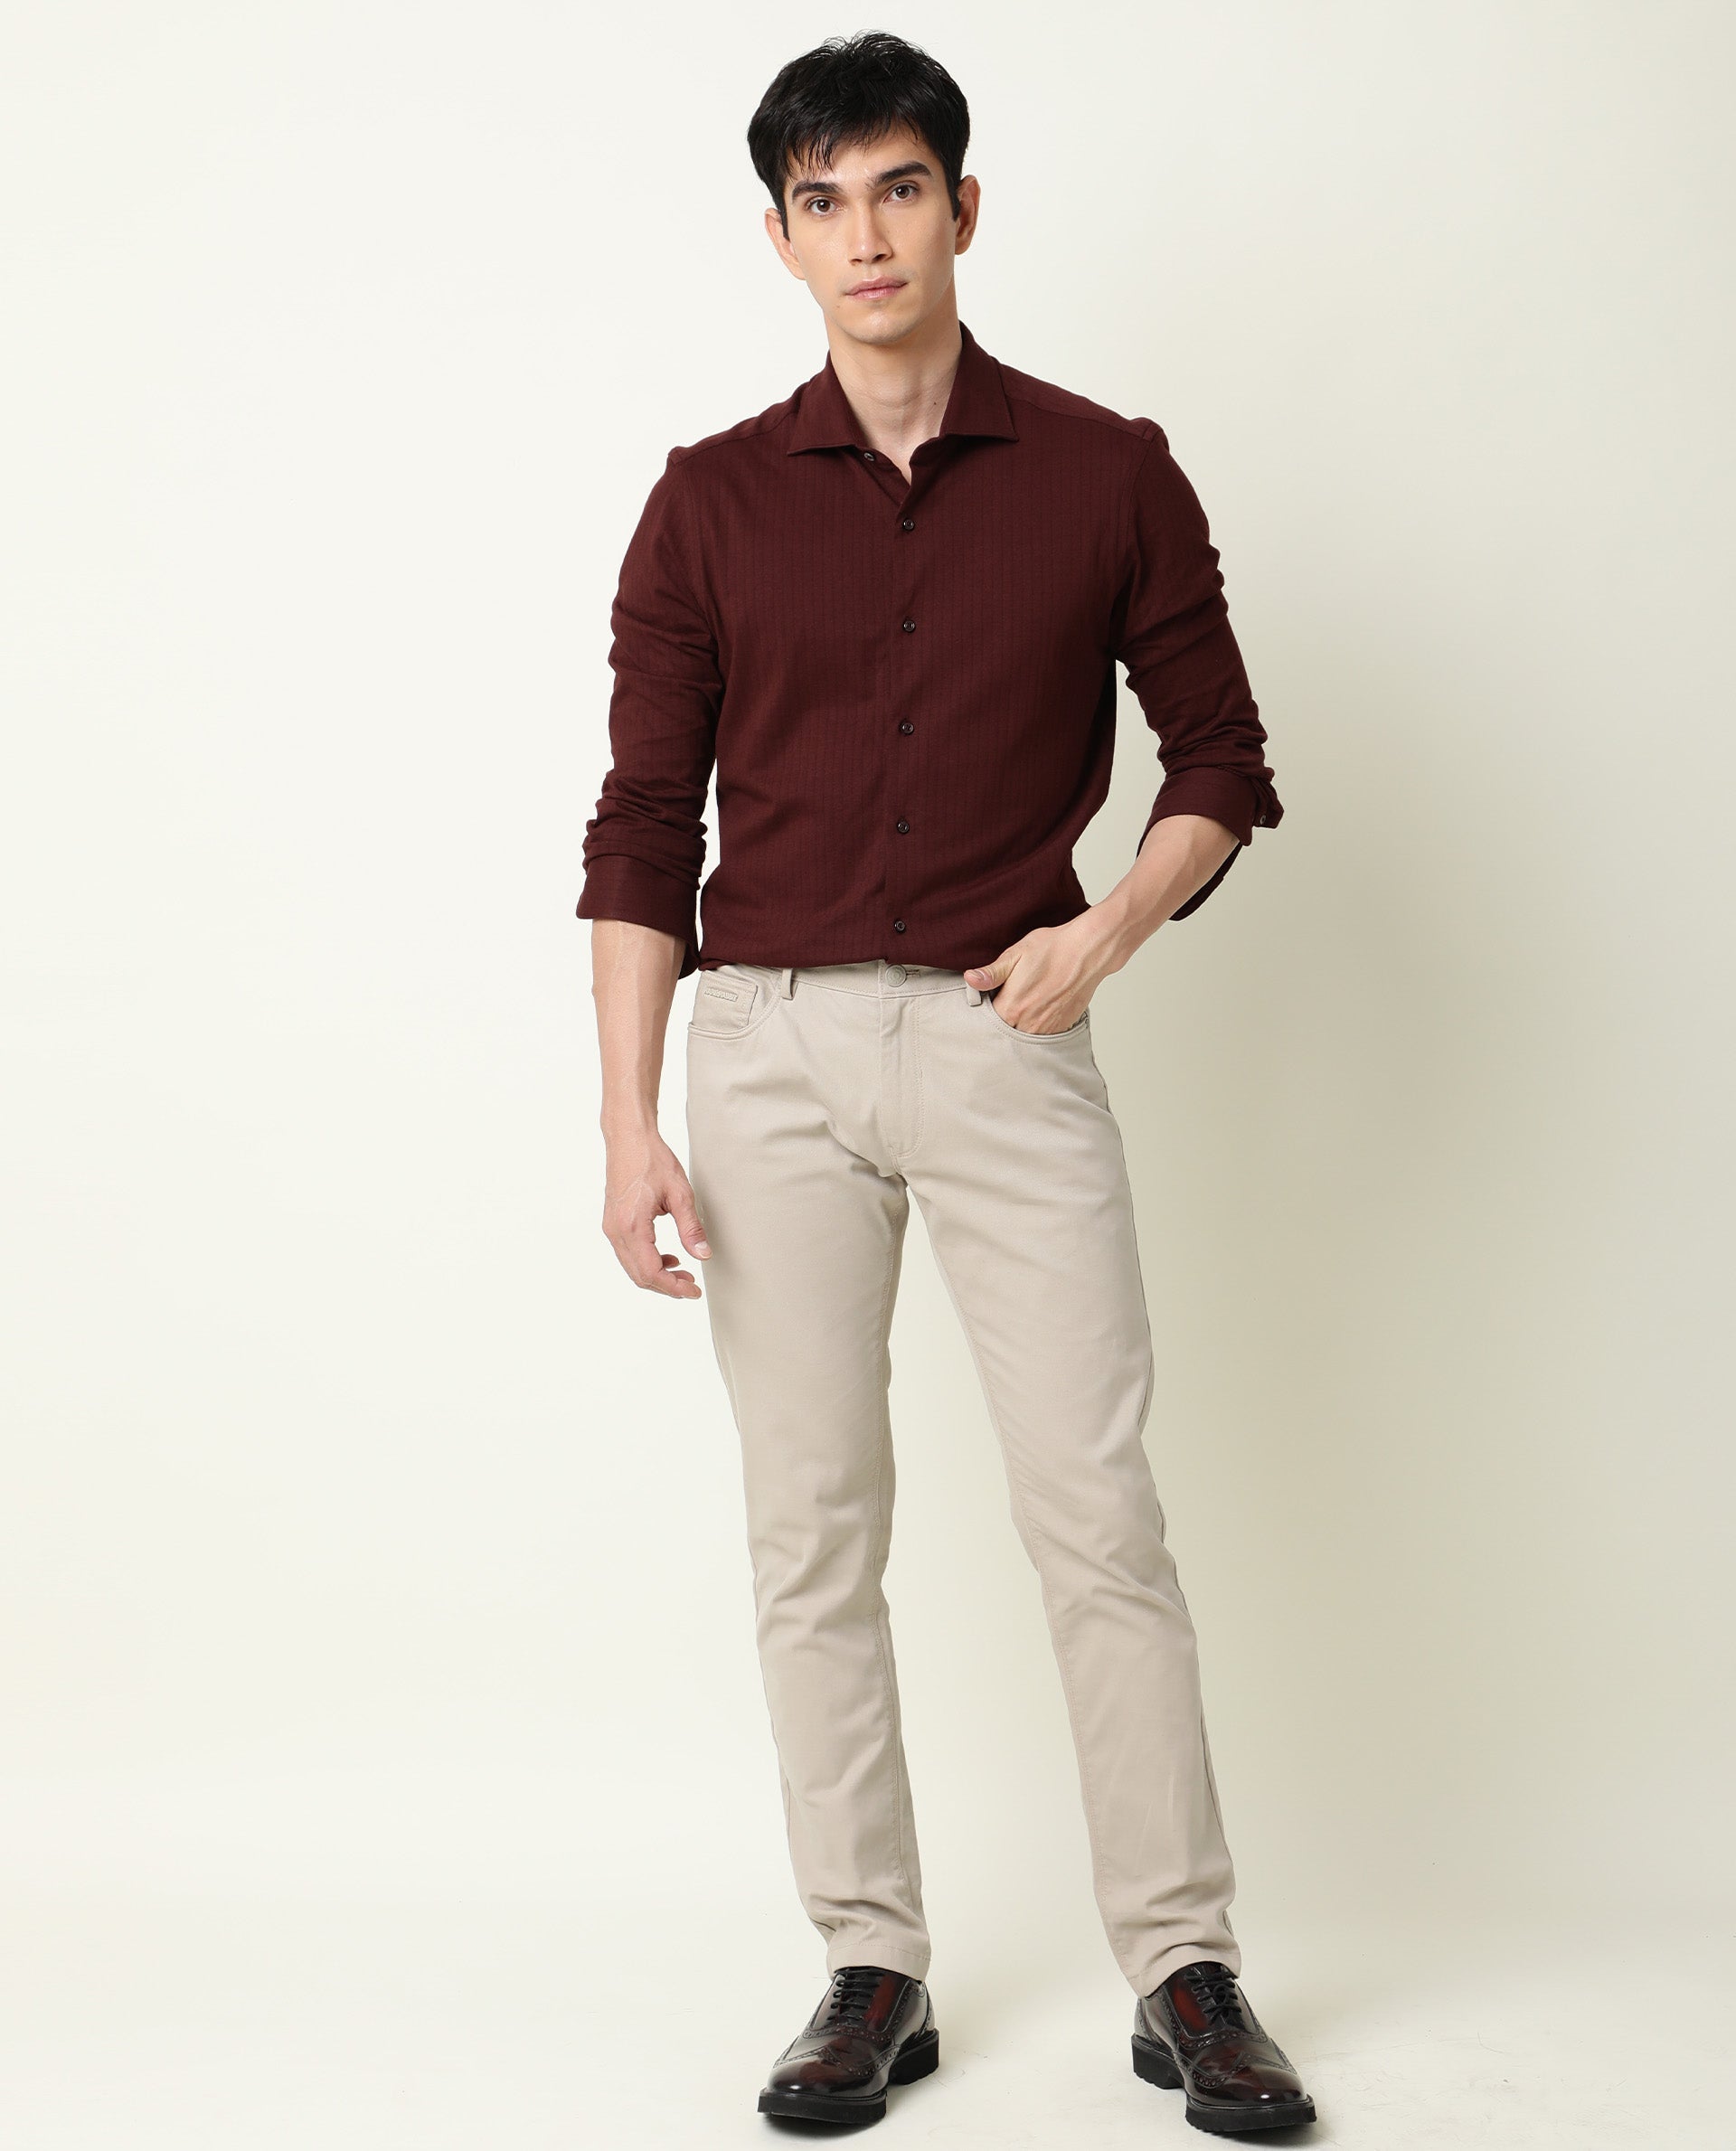 Dark Red & Maroon Pants For Guy's With Shirts Combination Outfits Ideas  2022 | Red pants outfit, Maroon pants, Mens outfits